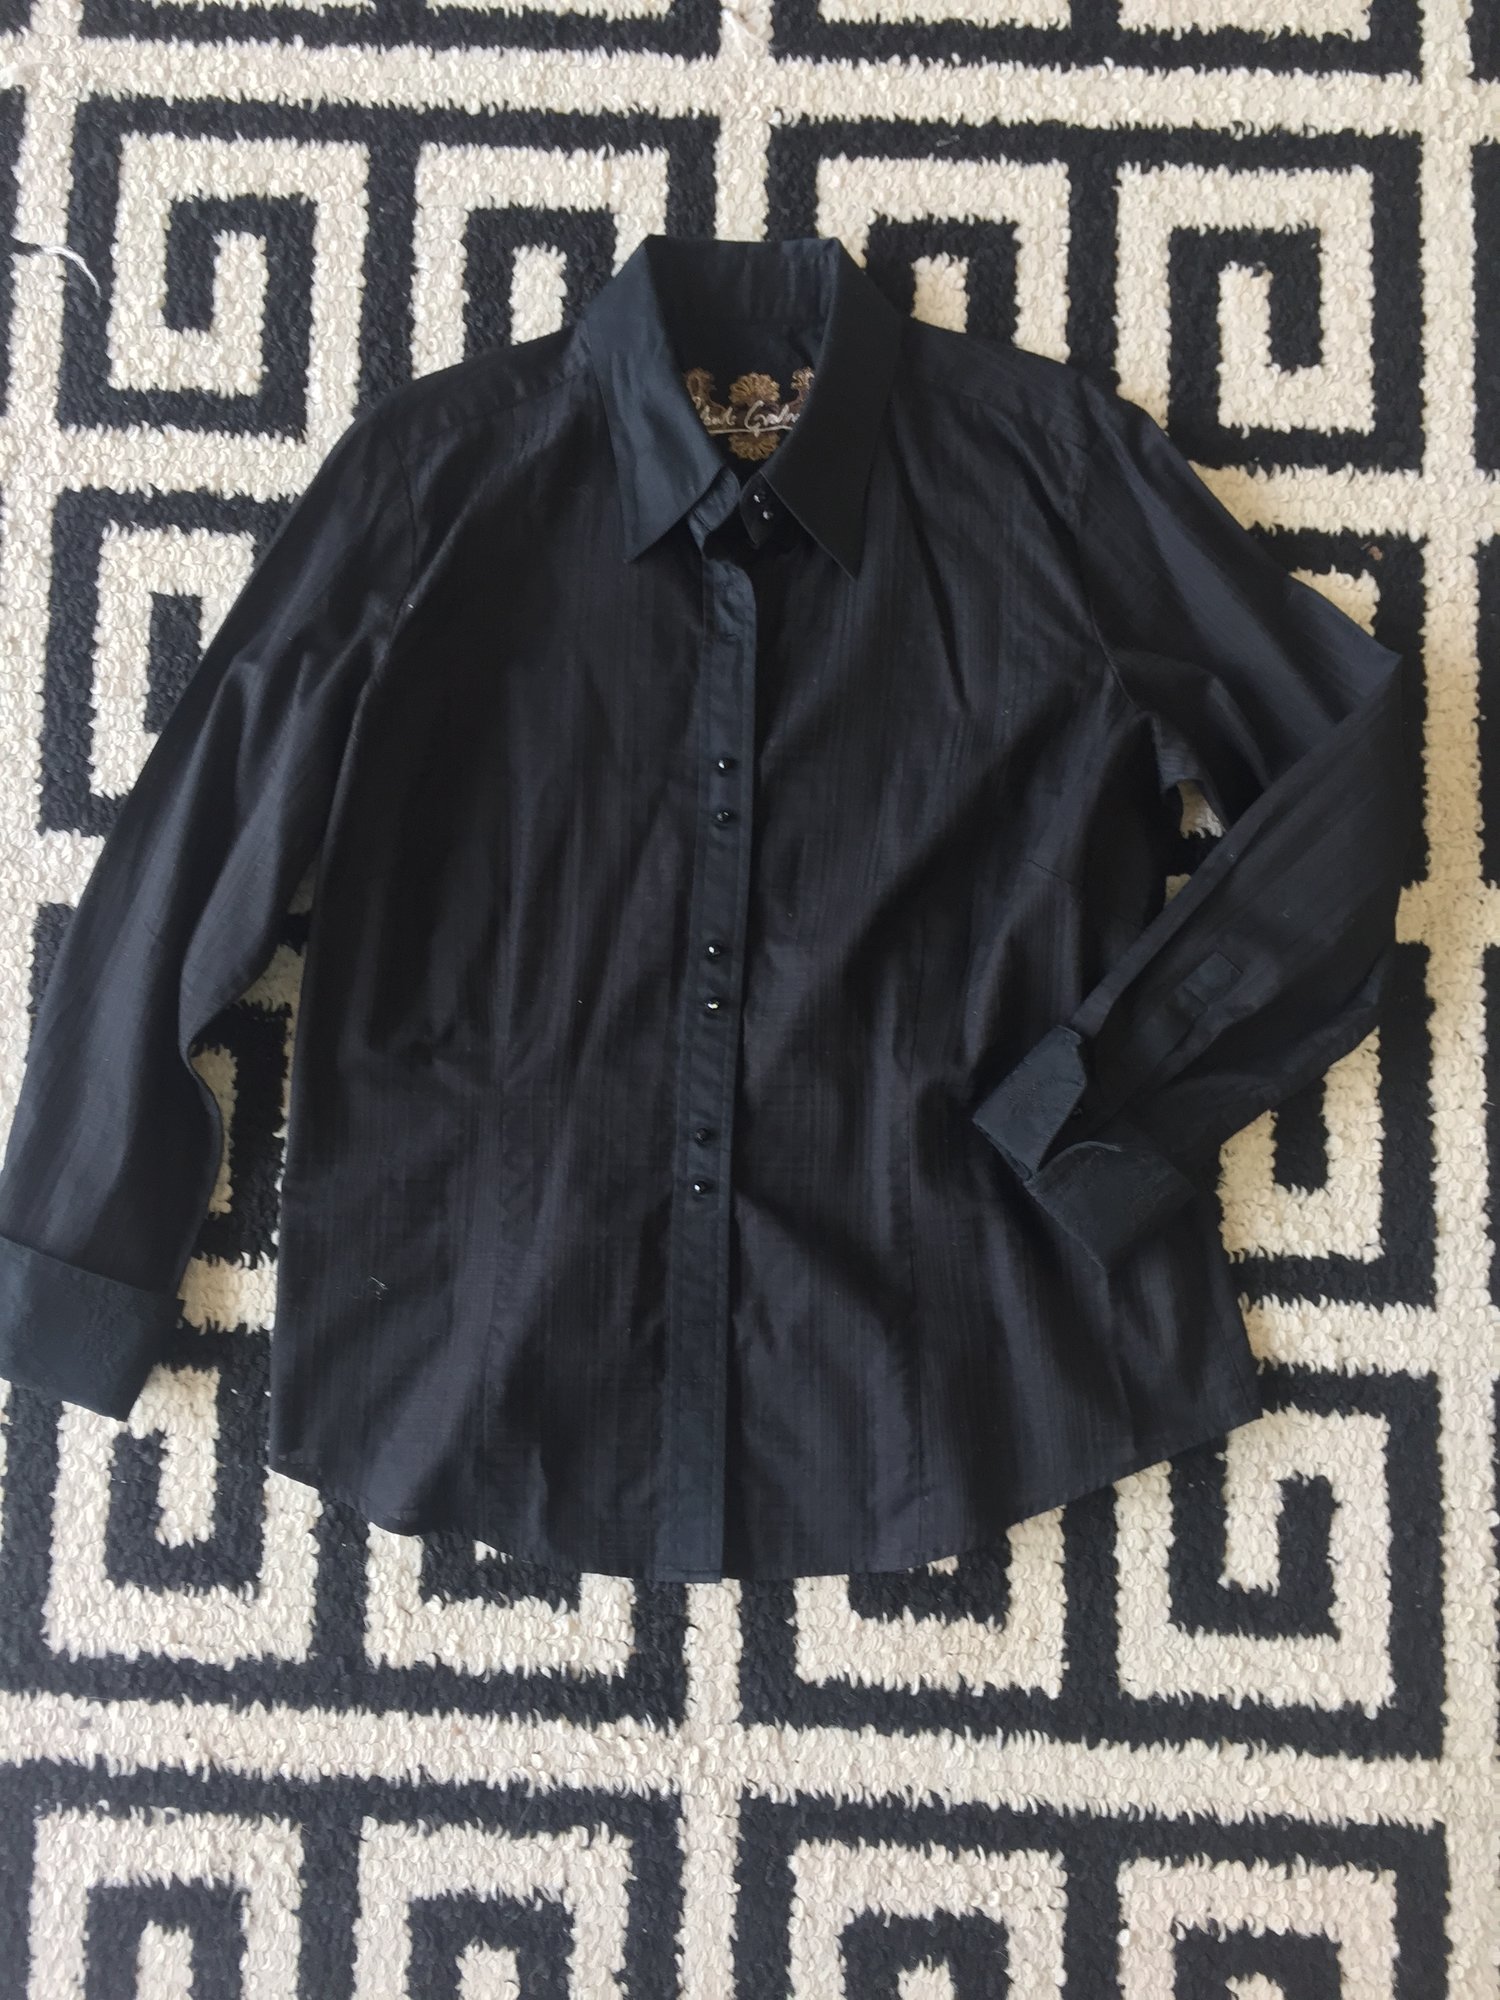 Like new Robert Graham long sleeved top, sized extra large. Black stripes throughout. 100% cotton, dry clean only. Retail approx: $278